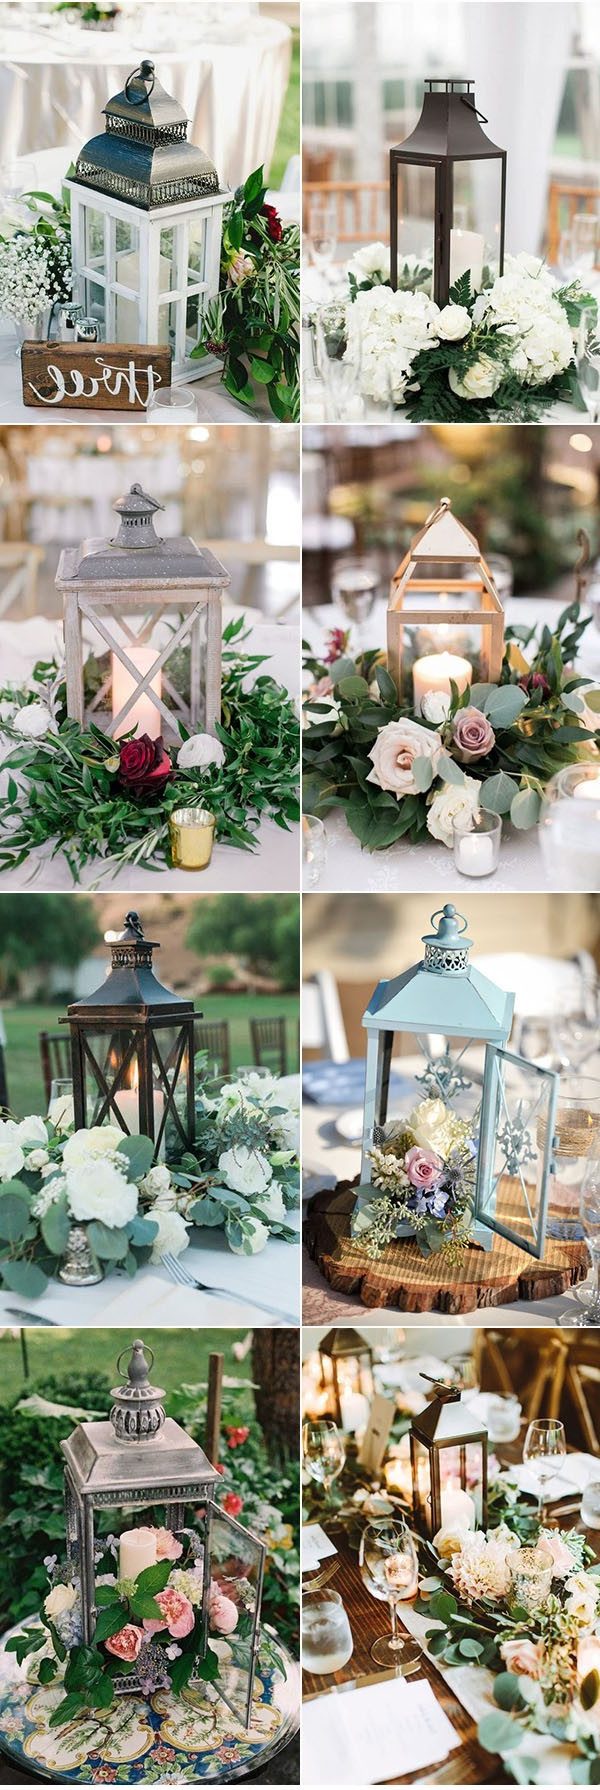 Rustic lantern wedding centerpieces with greenery floral decor